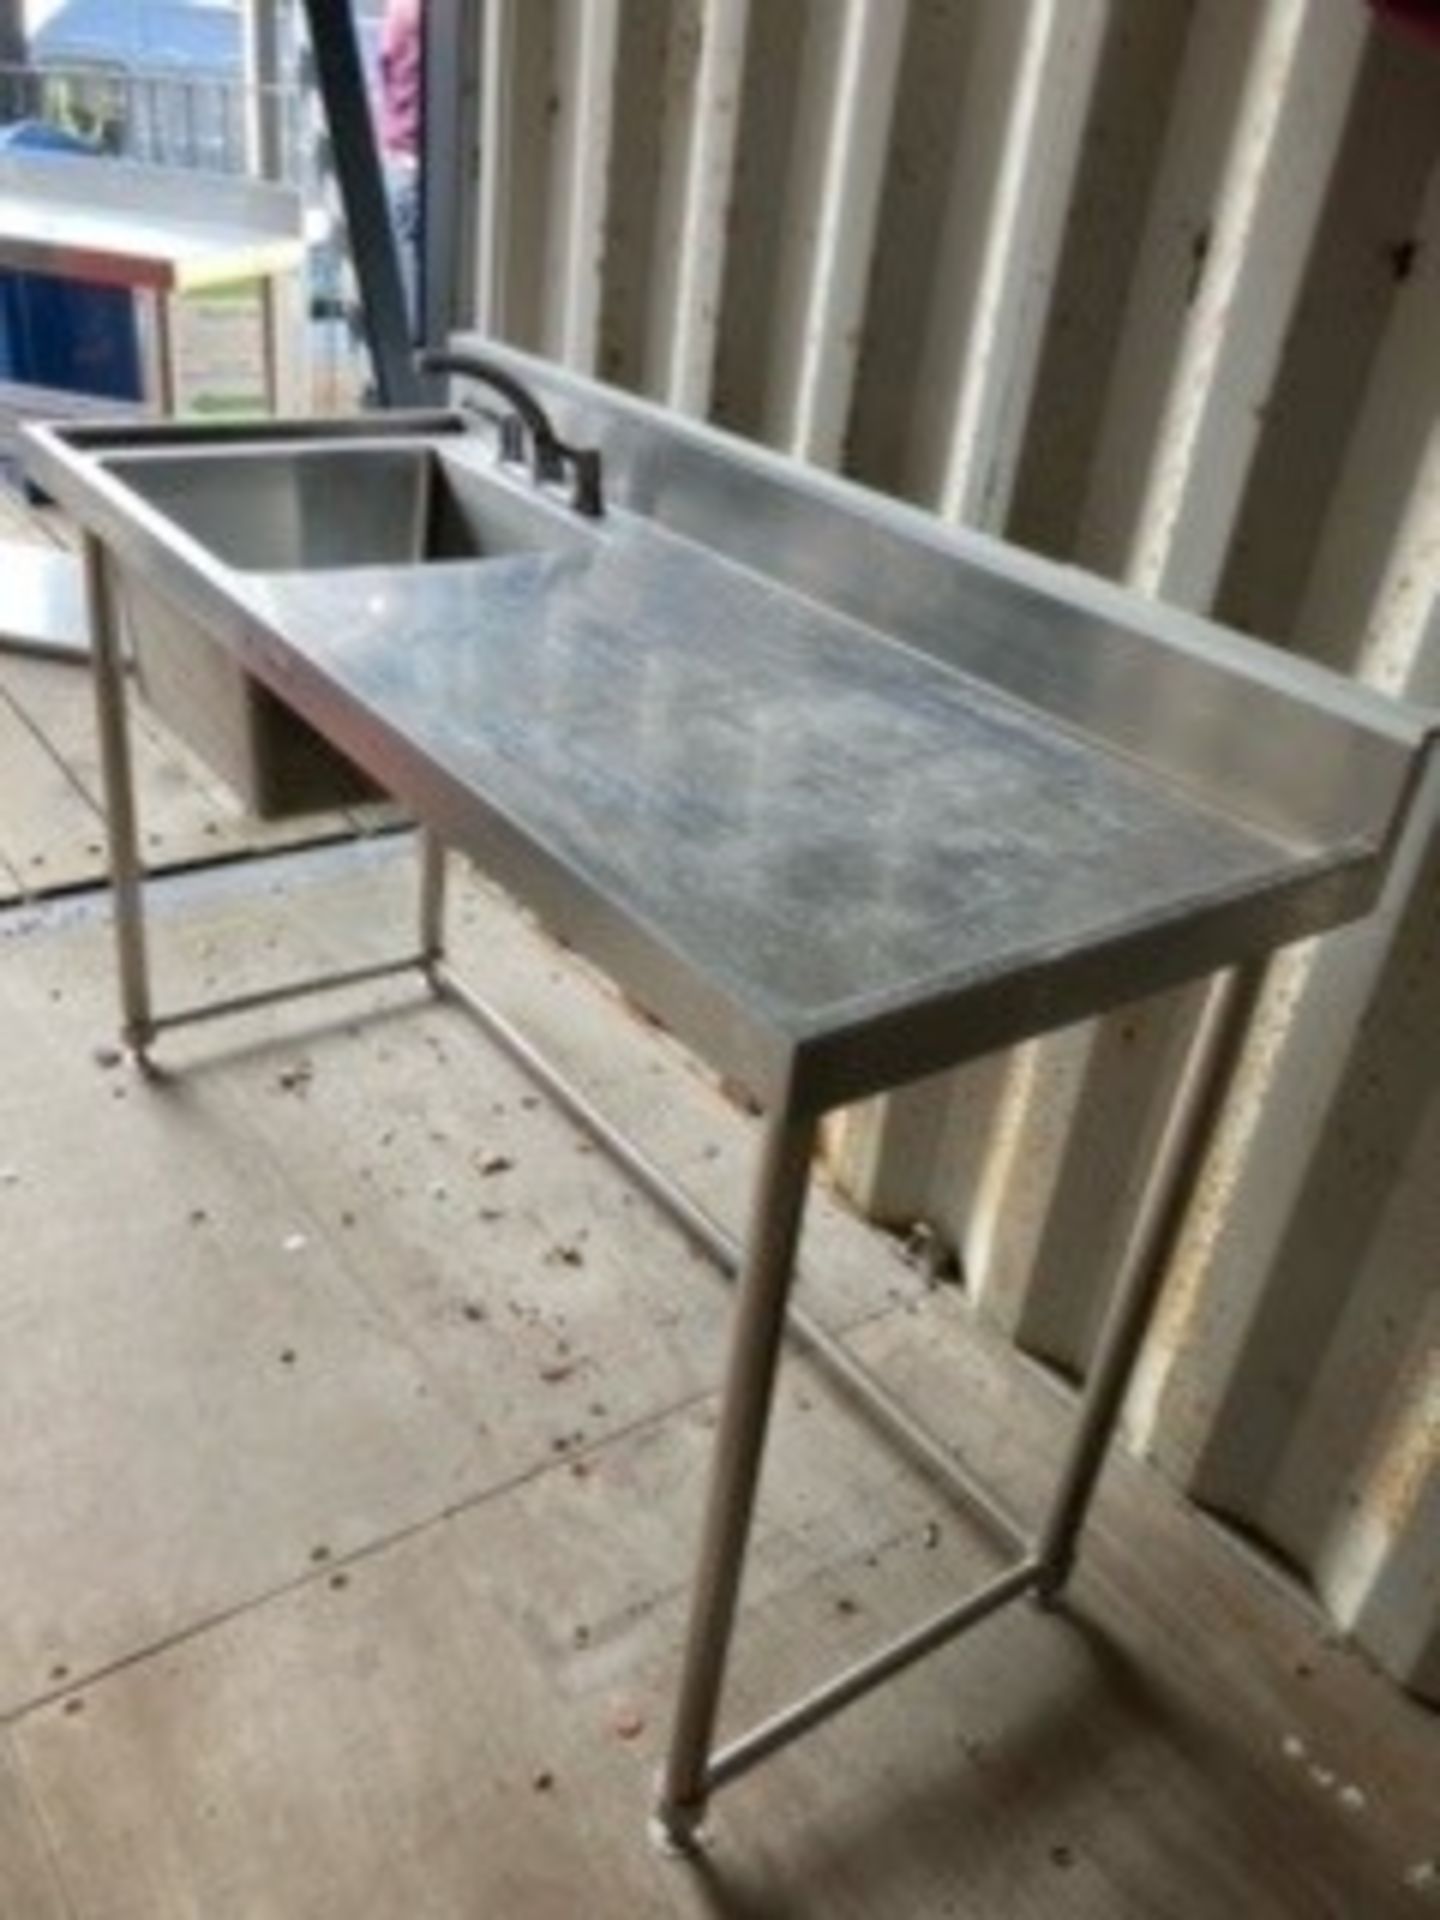 Simply Stainless Steel Preparation Table With Sink - Image 3 of 5